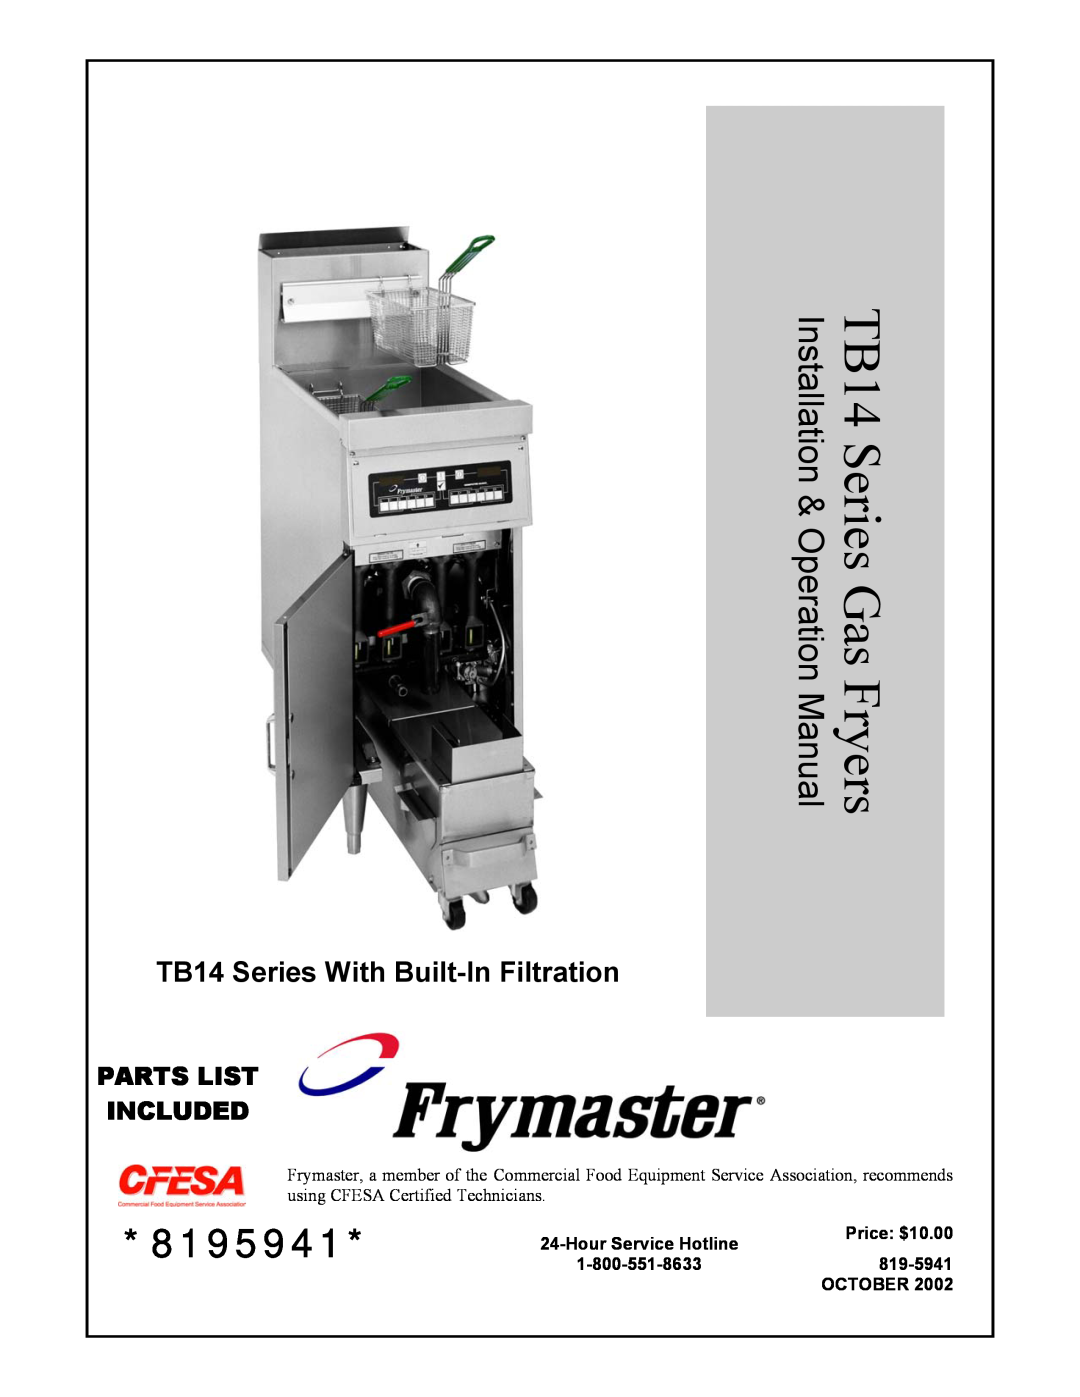 Frymaster operation manual TB14 Series With Built-In Filtration, Parts List Included, 8195941, TB14 Series Gas Fryers 